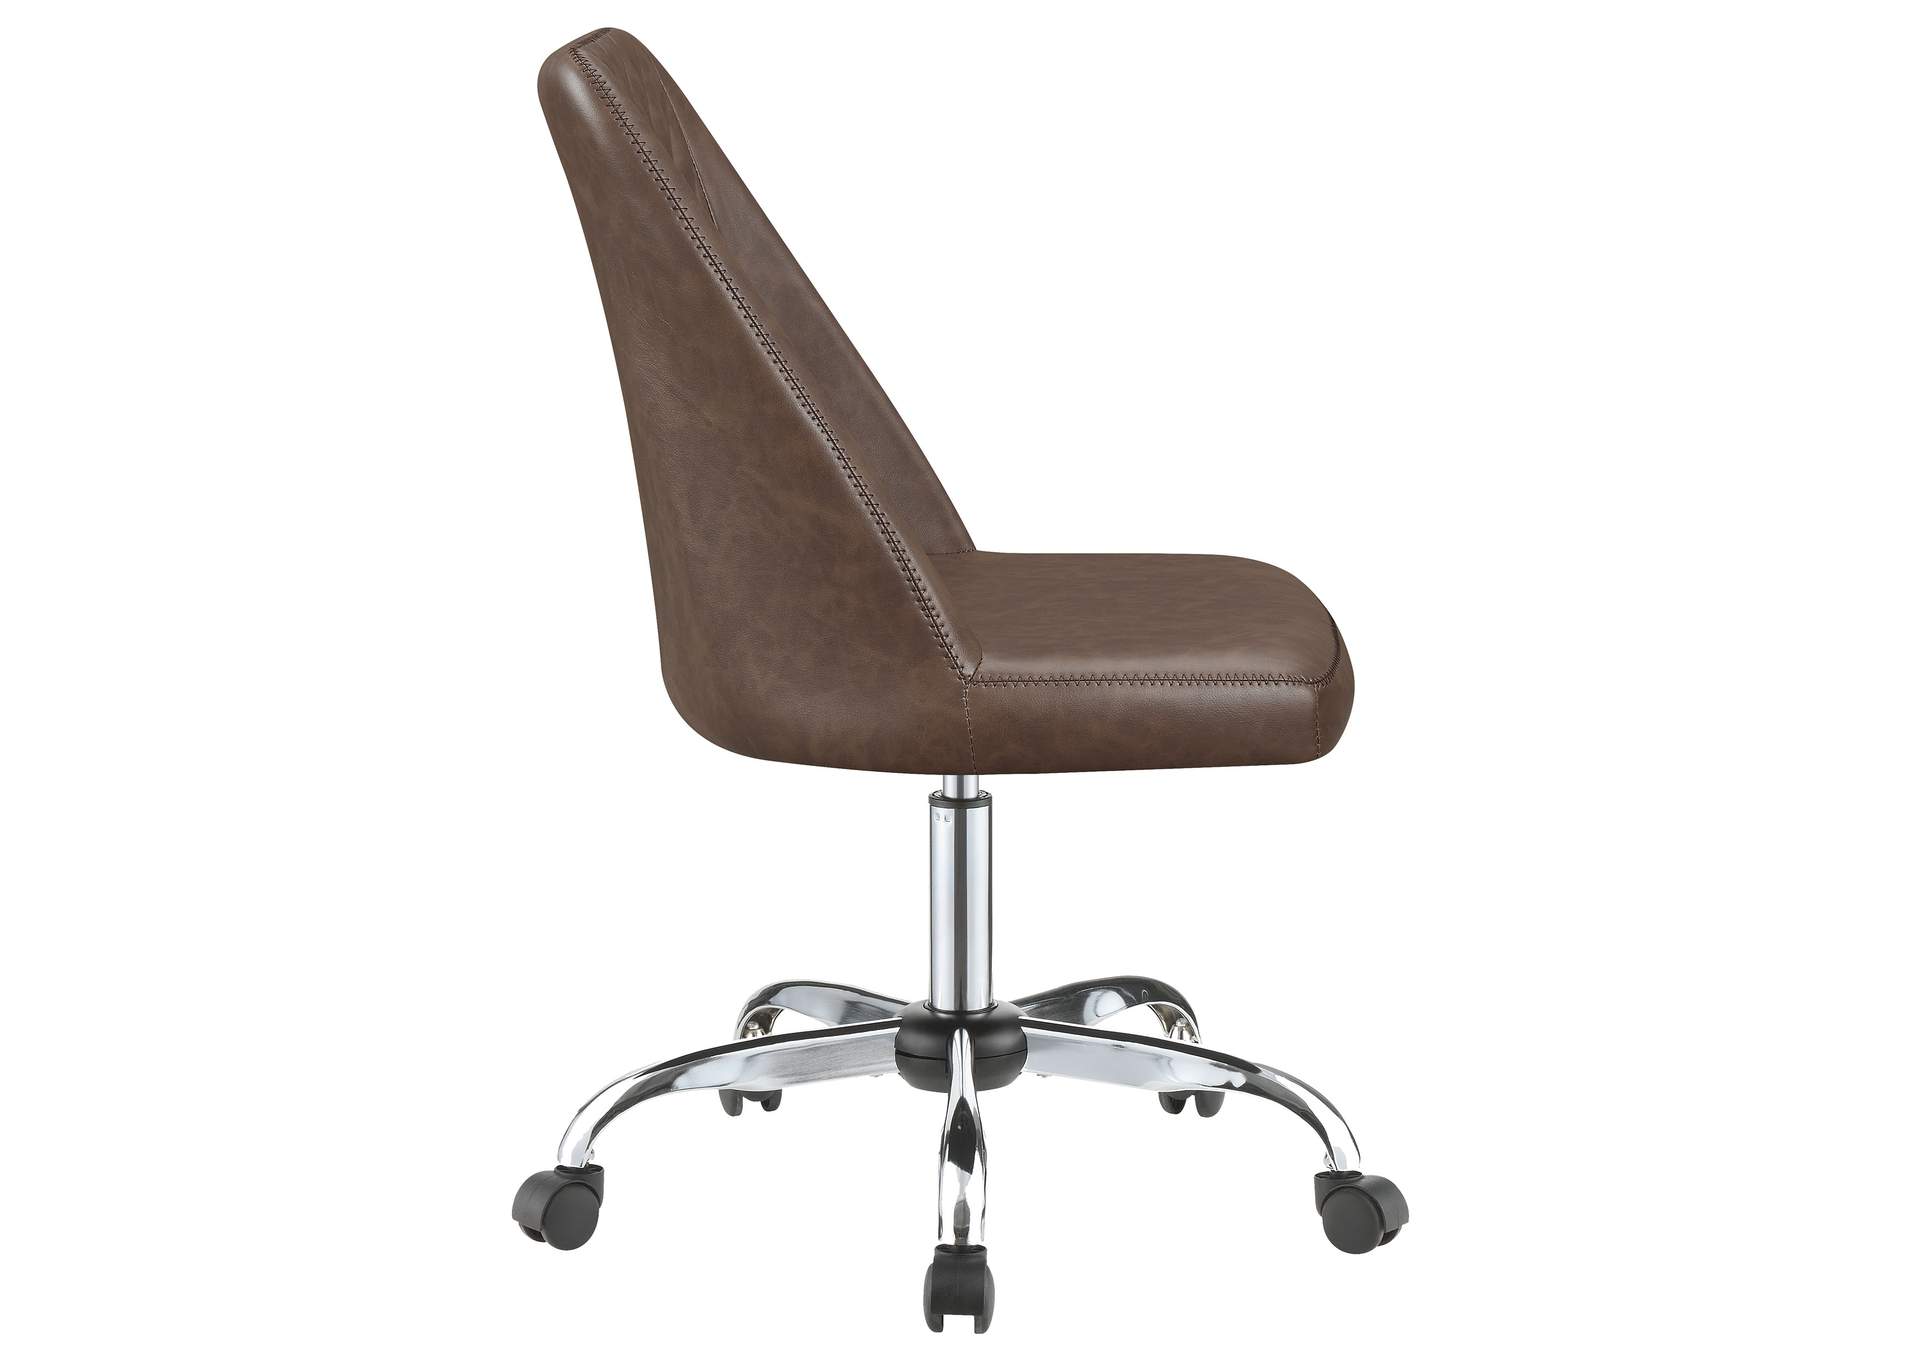 Althea Upholstered Tufted Back Office Chair Brown and Chrome,Coaster Furniture